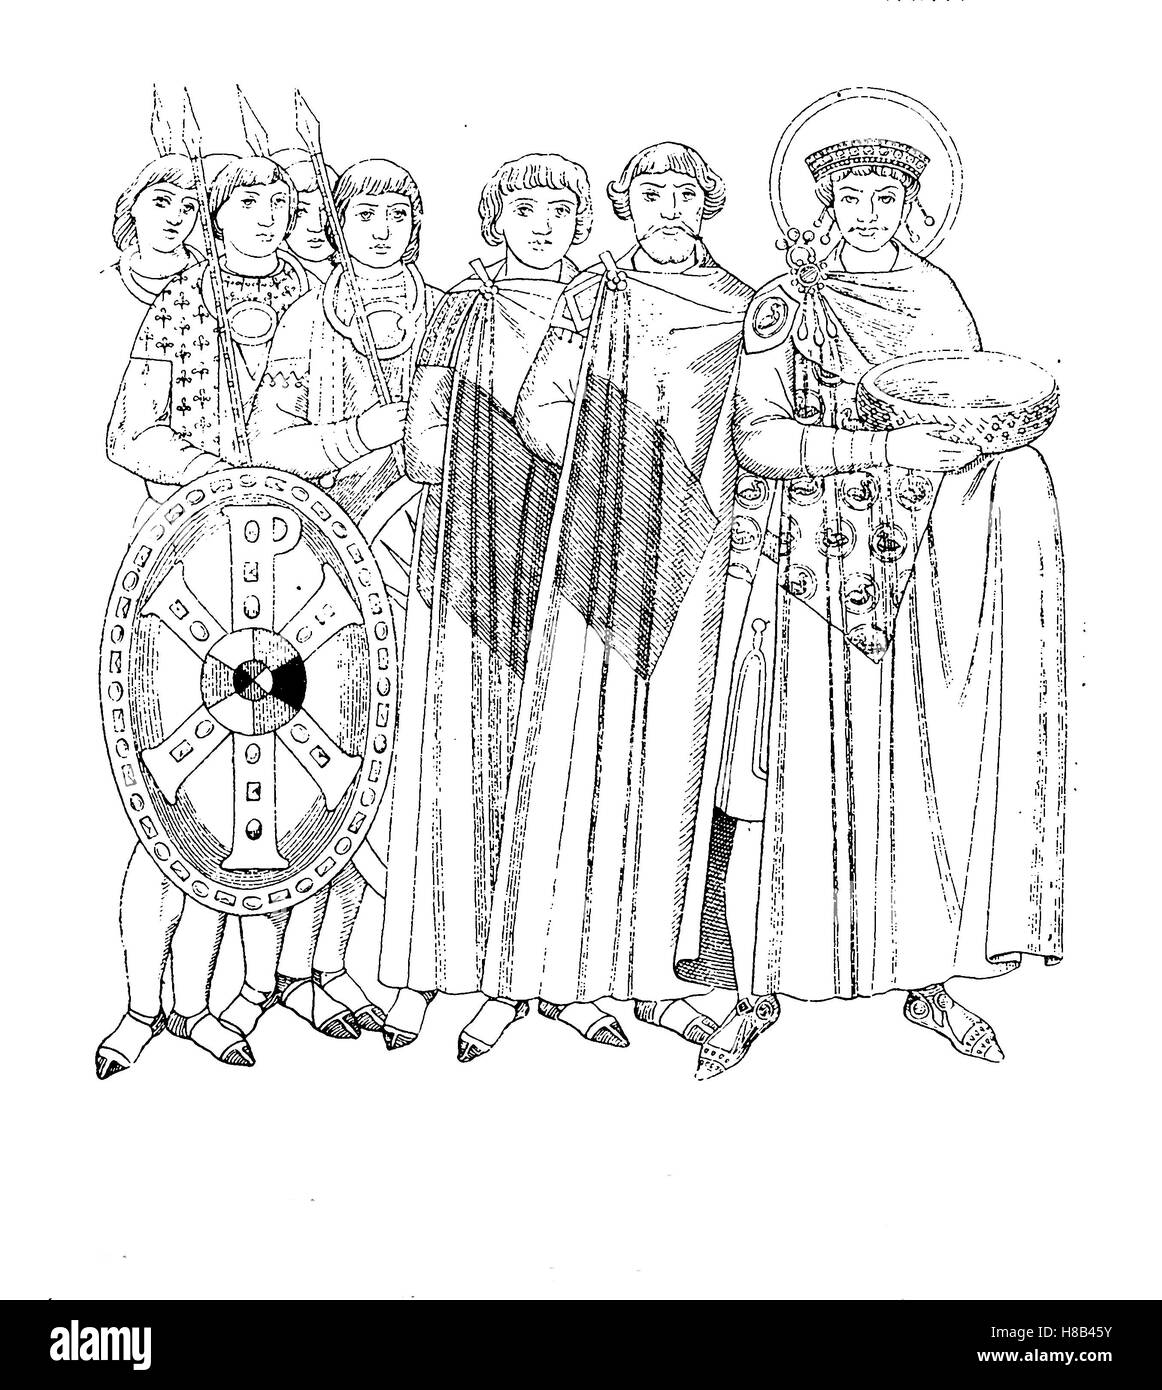 Emperor Justinian and his entourage, 6th century, after a mosaic painting in Ravenna, History of fashion, costume story Stock Photo